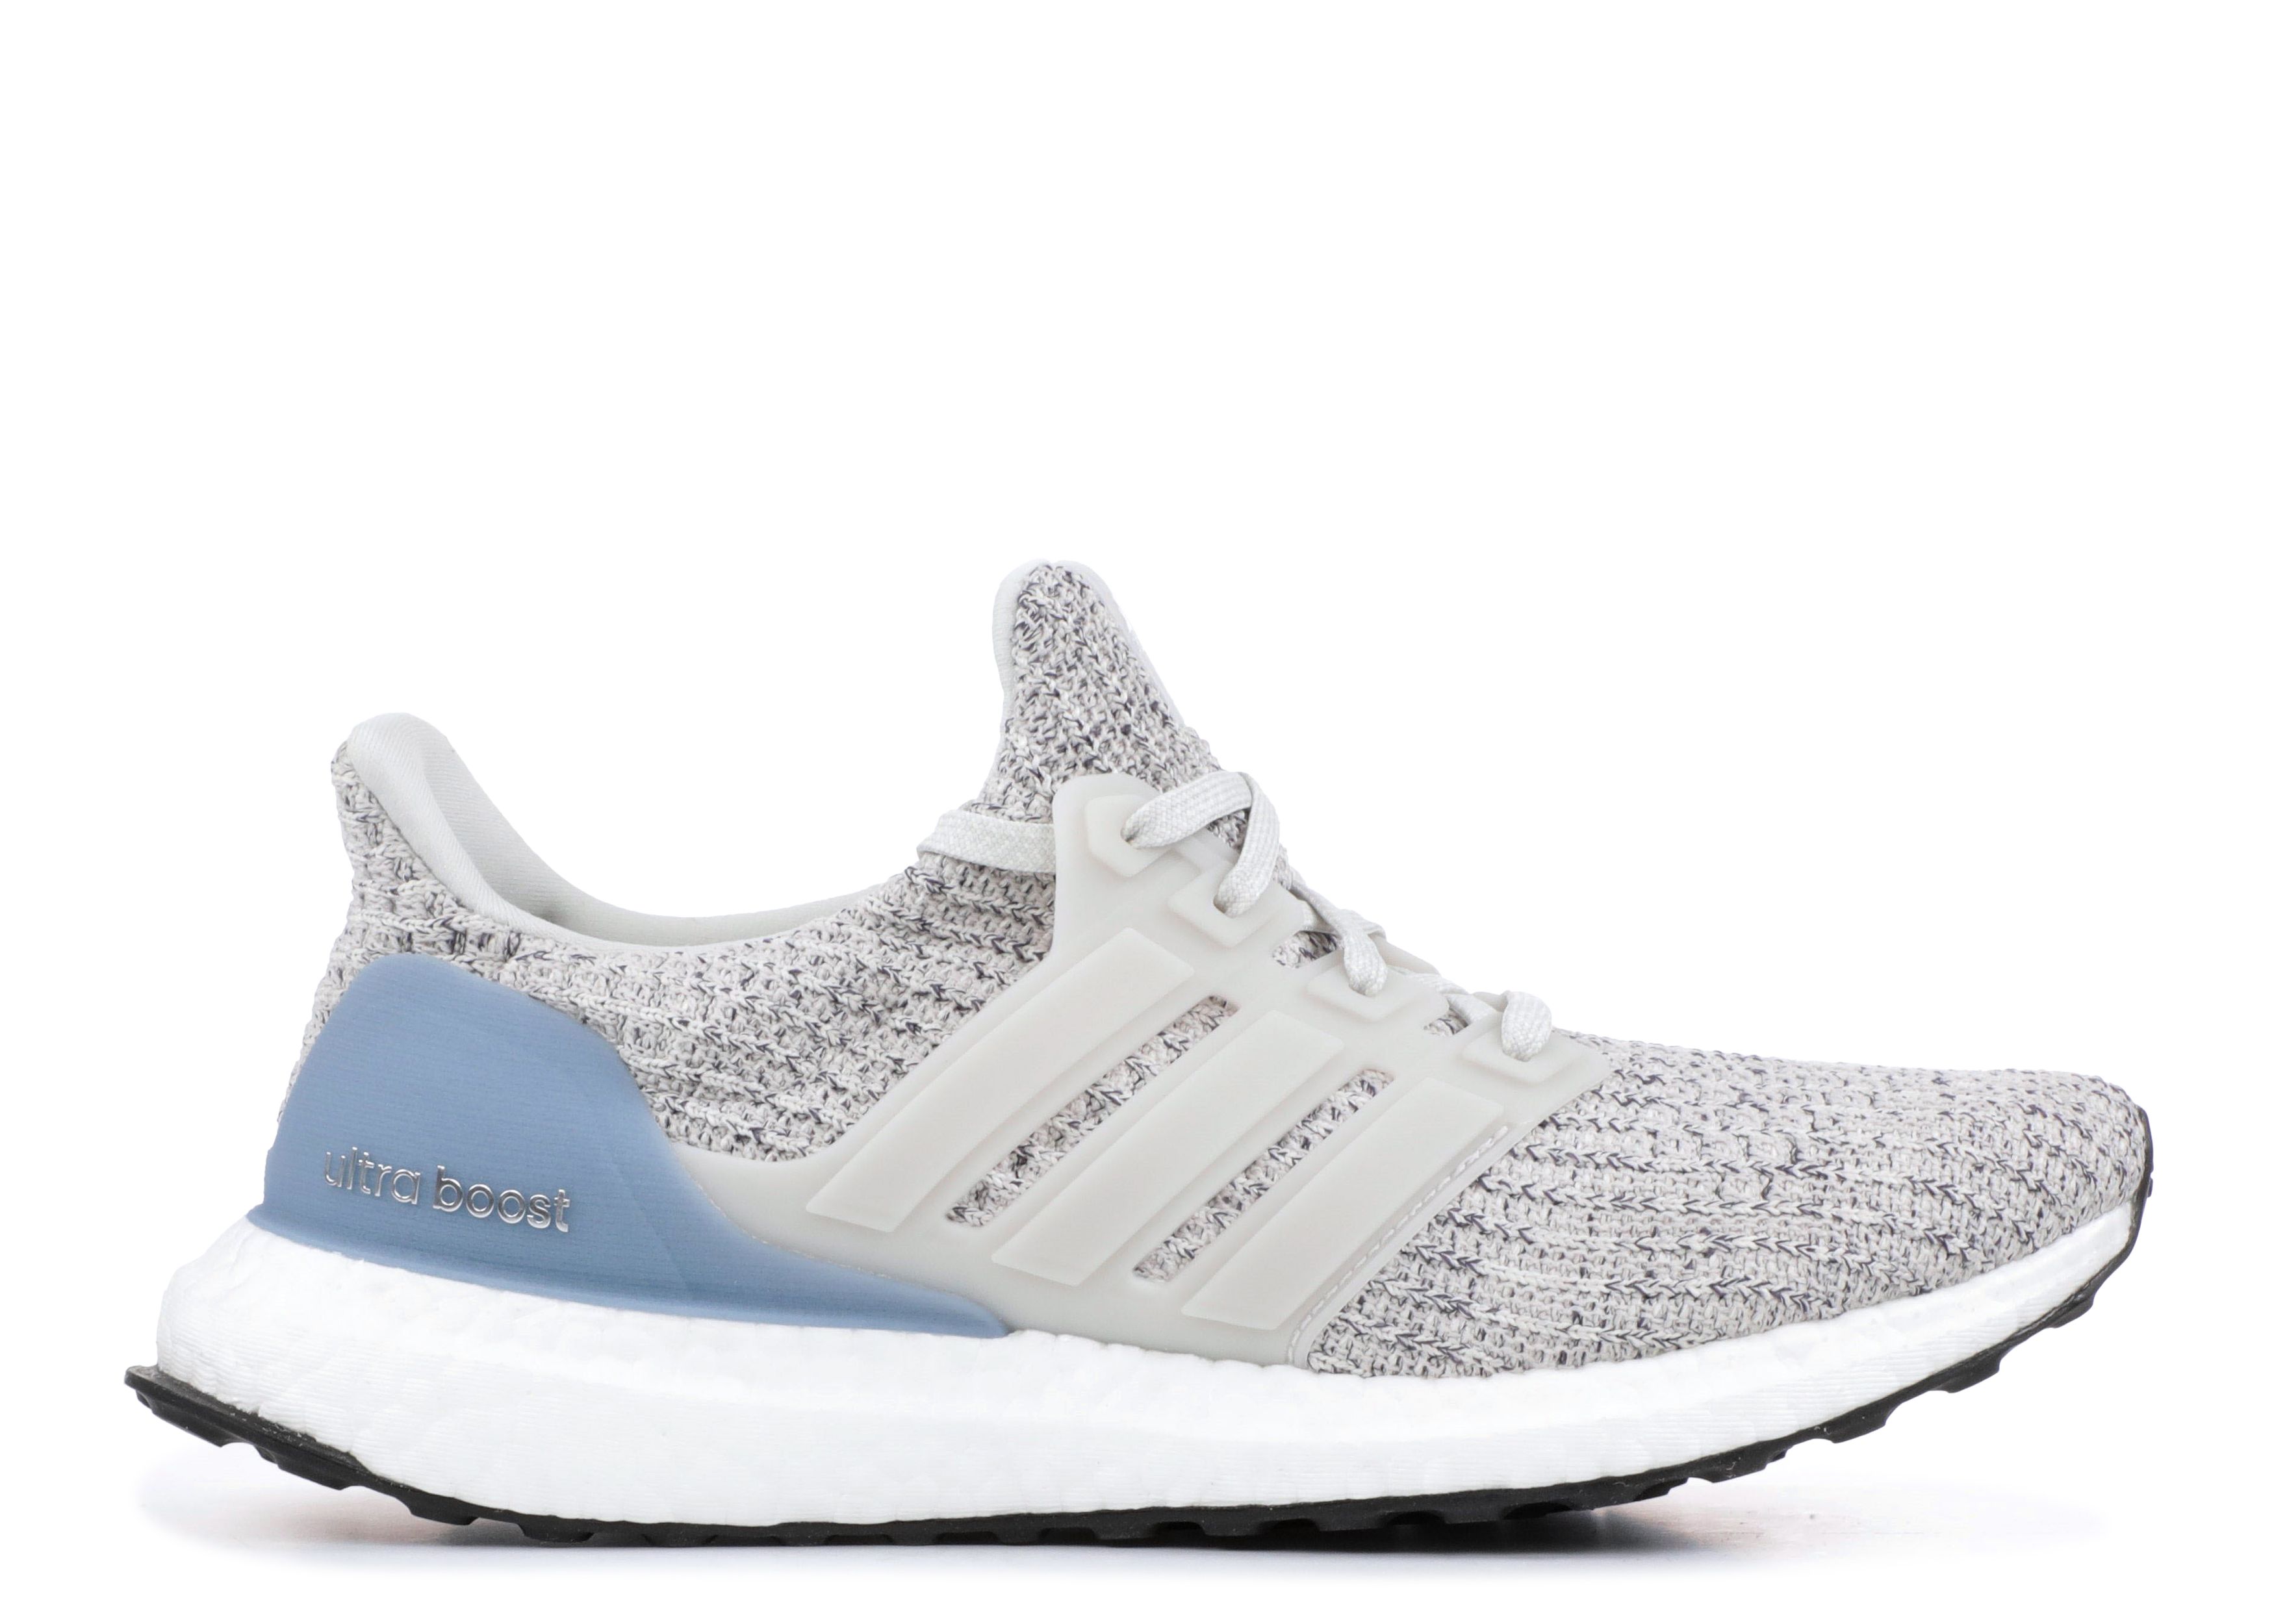 Adidas Womens Ultra Boost X BB6155 Grey Blue Running Shoes Lace Up